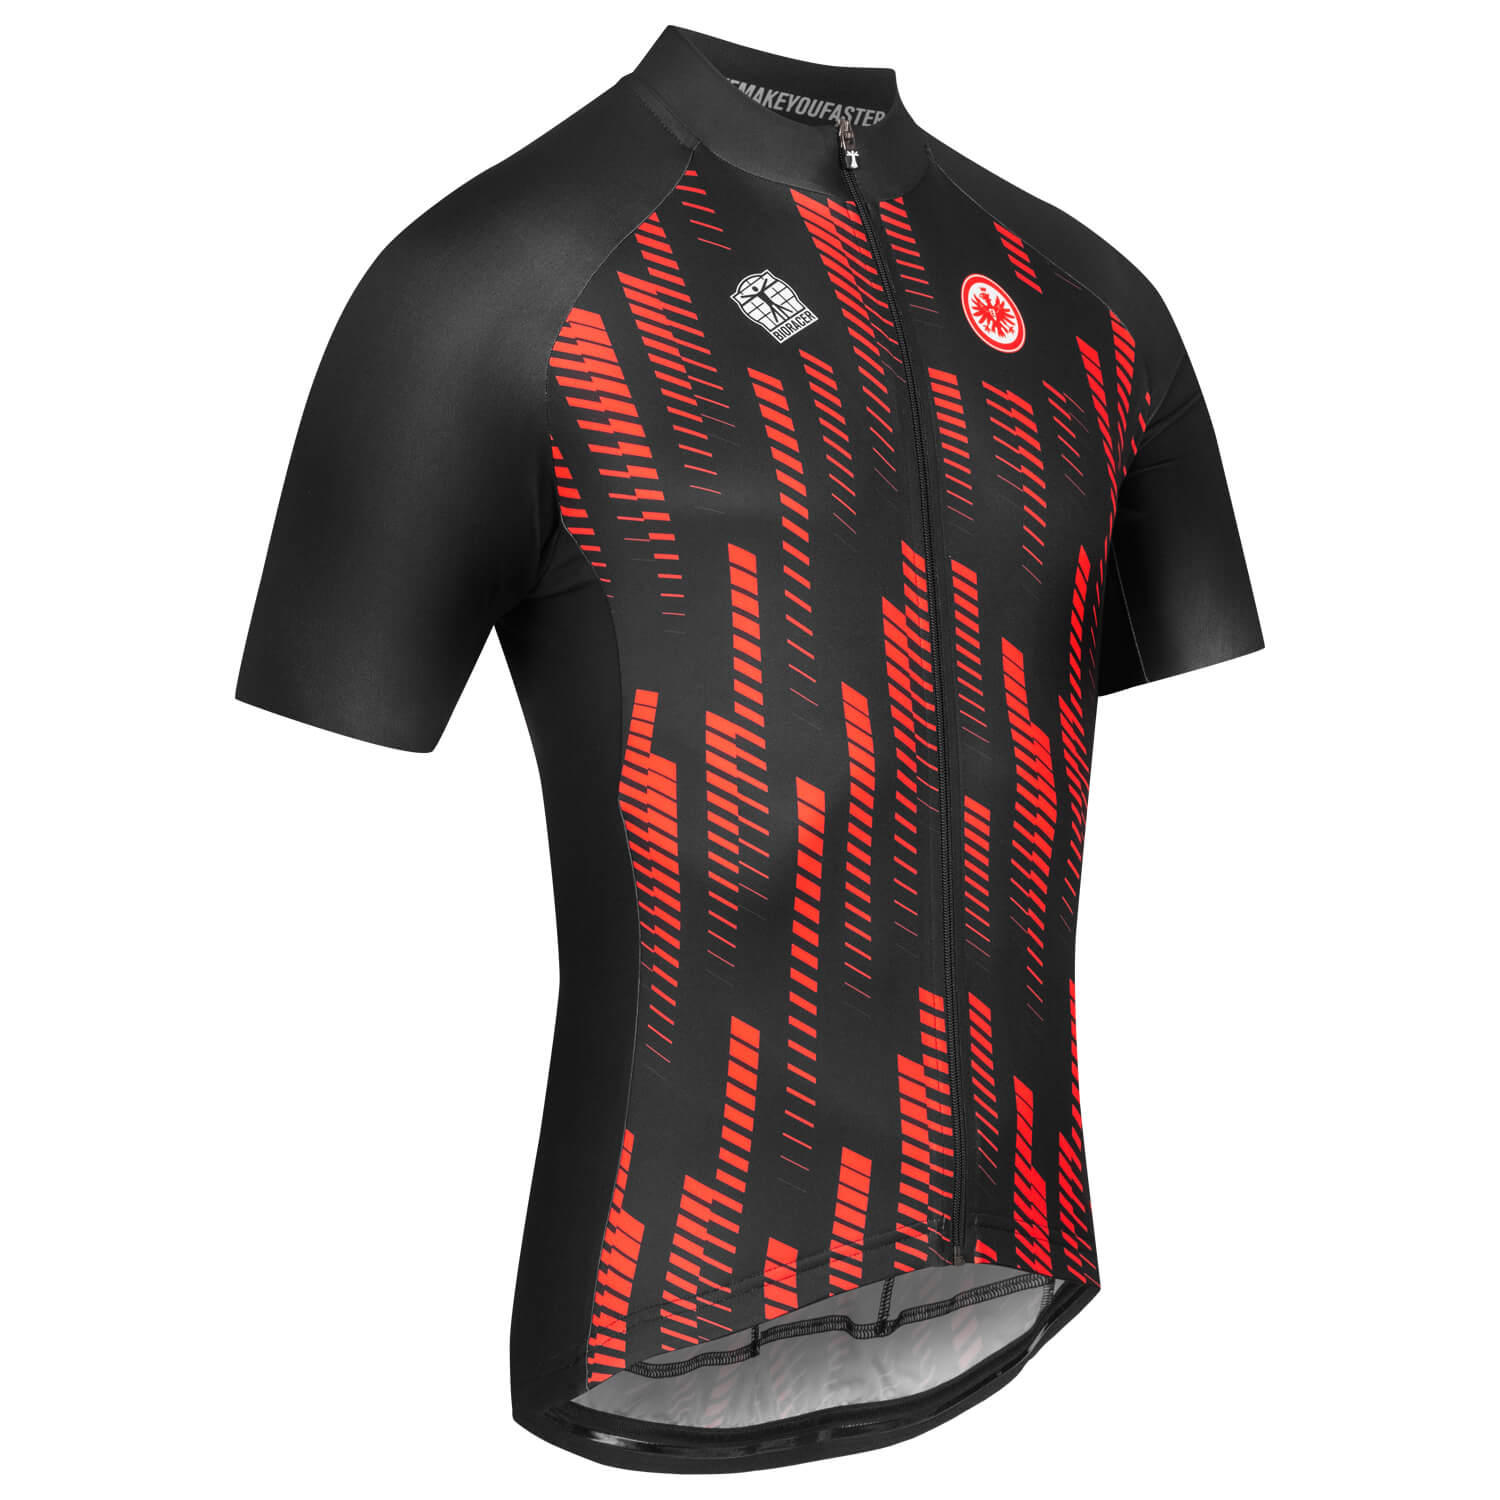 Bild 4: Cycling Jersey Red Style 